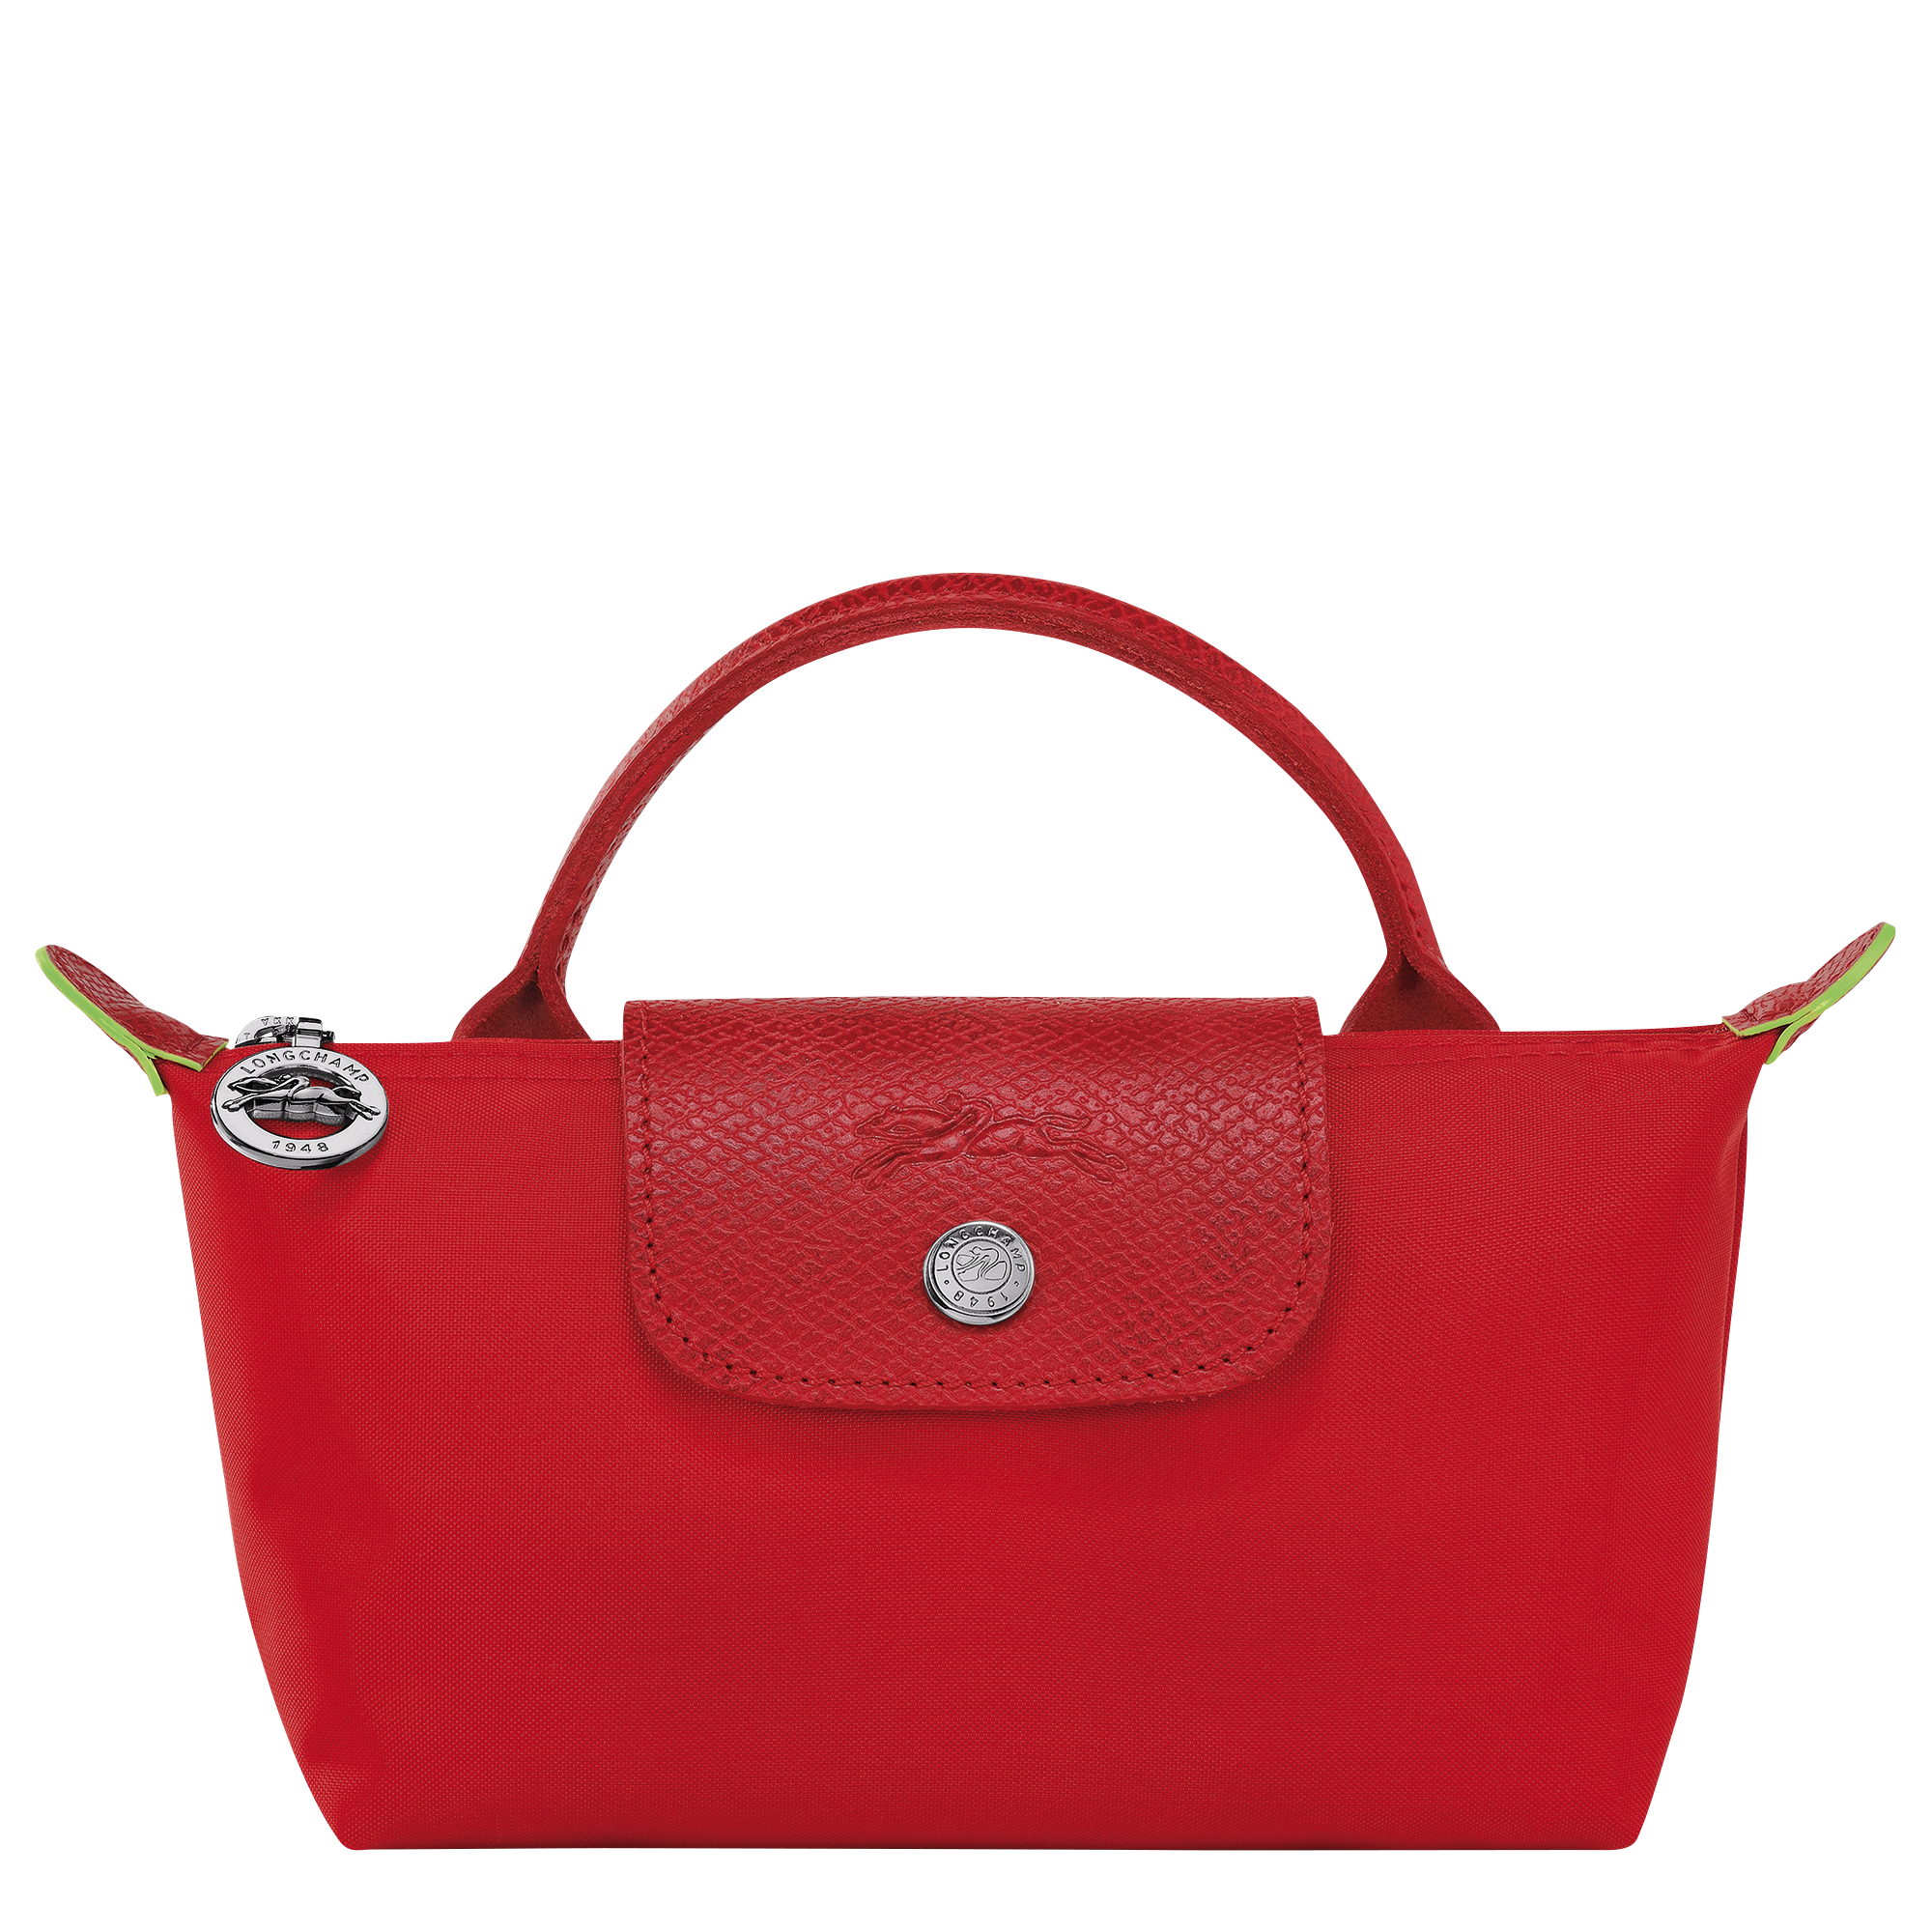 Le Pliage Green Pouch with handle, Tomato